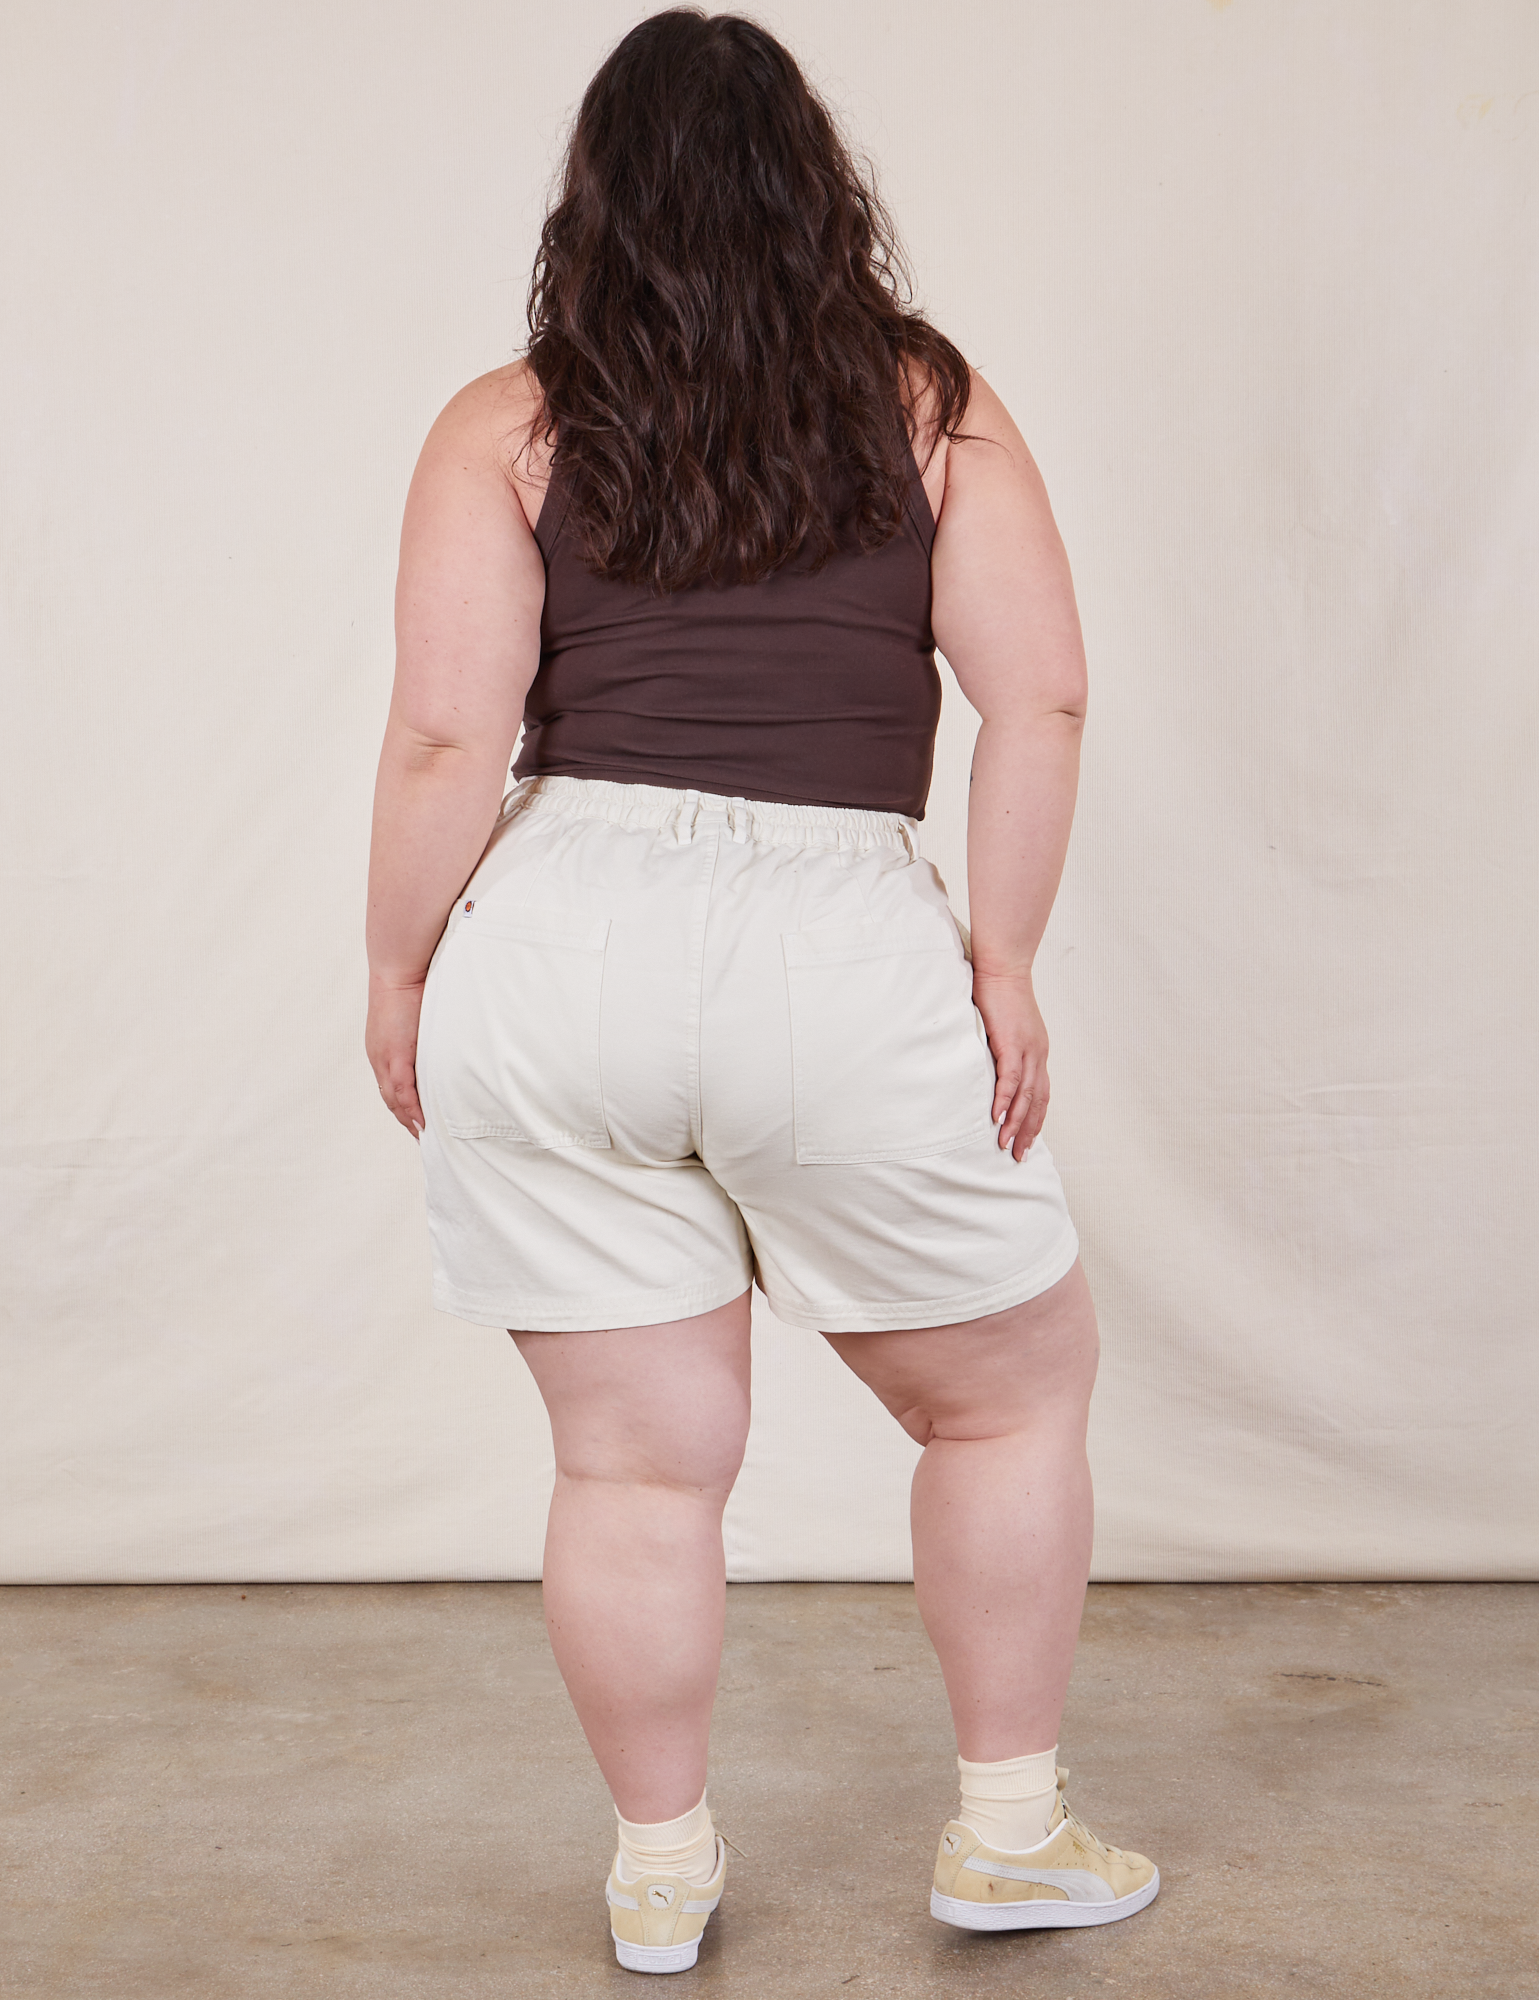 Back view of Classic Work Shorts in Vintage Tee Off-White and espresso brown Cropped Tank Top on Ashley